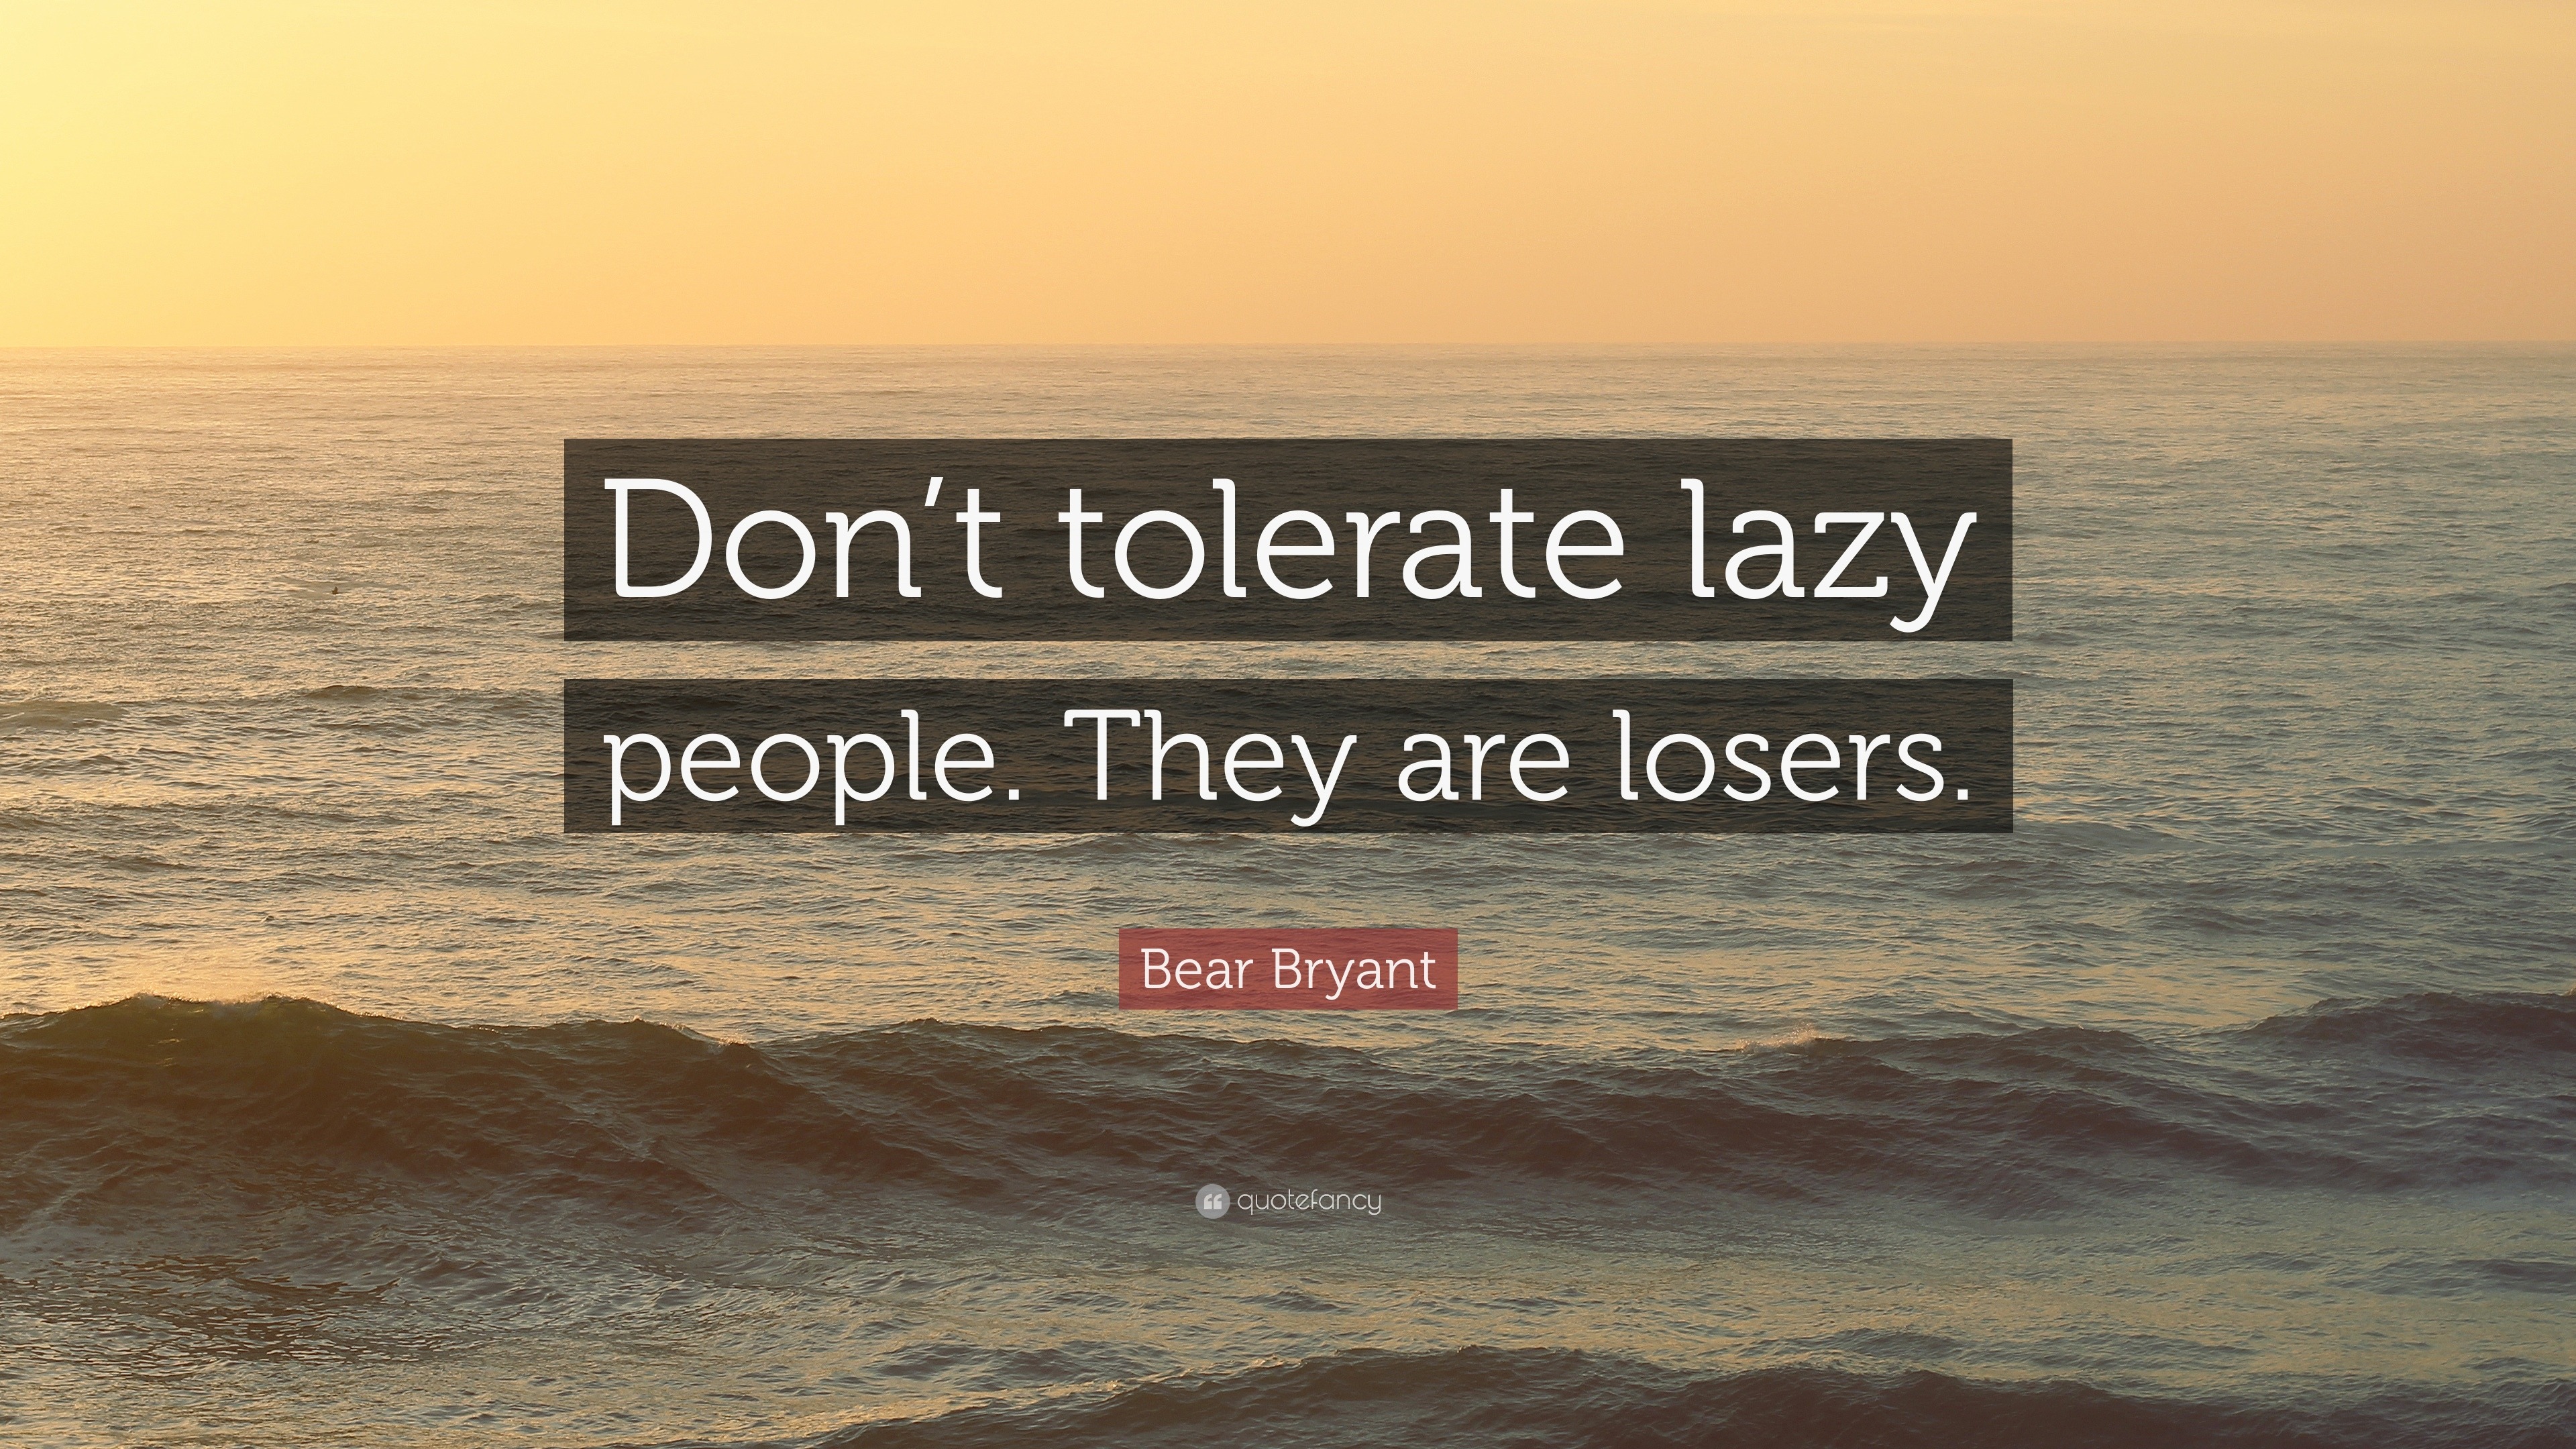 Bear Bryant Quote: “Don’t tolerate lazy people. They are losers.” (12